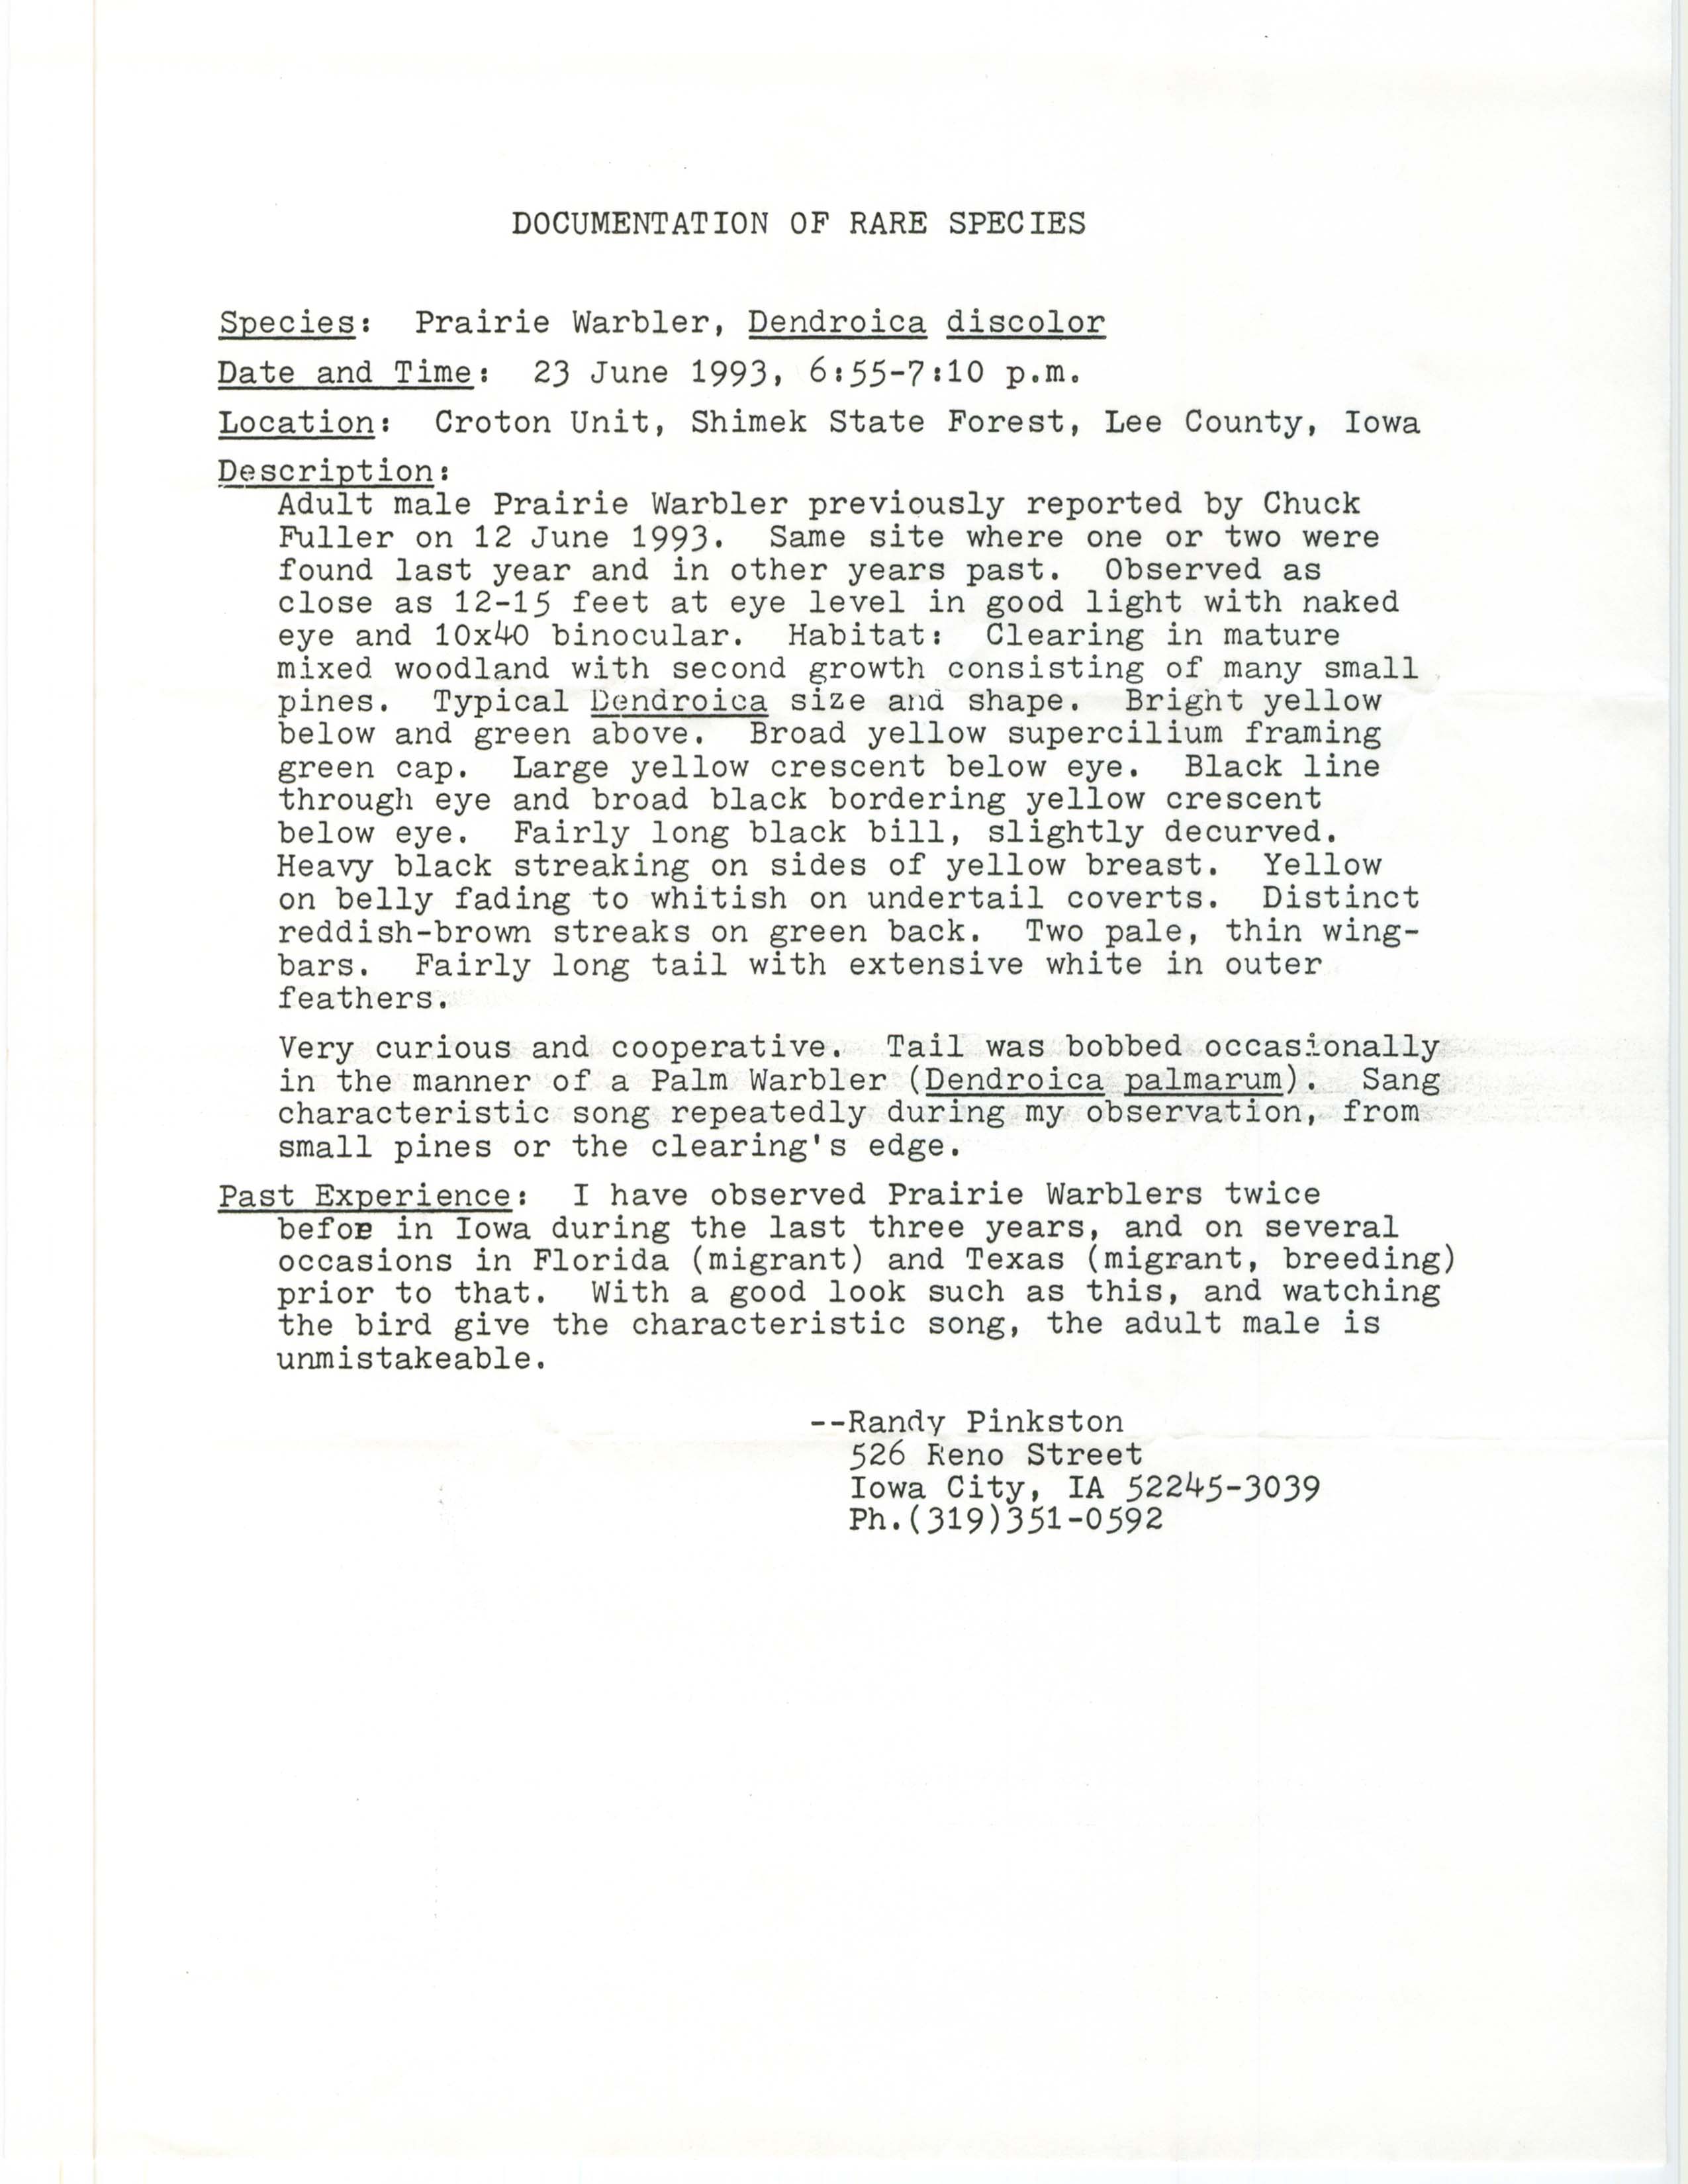 Rare bird documentation form for Prairie Warbler at the Croton Unit in Shimek State Forest, 1993